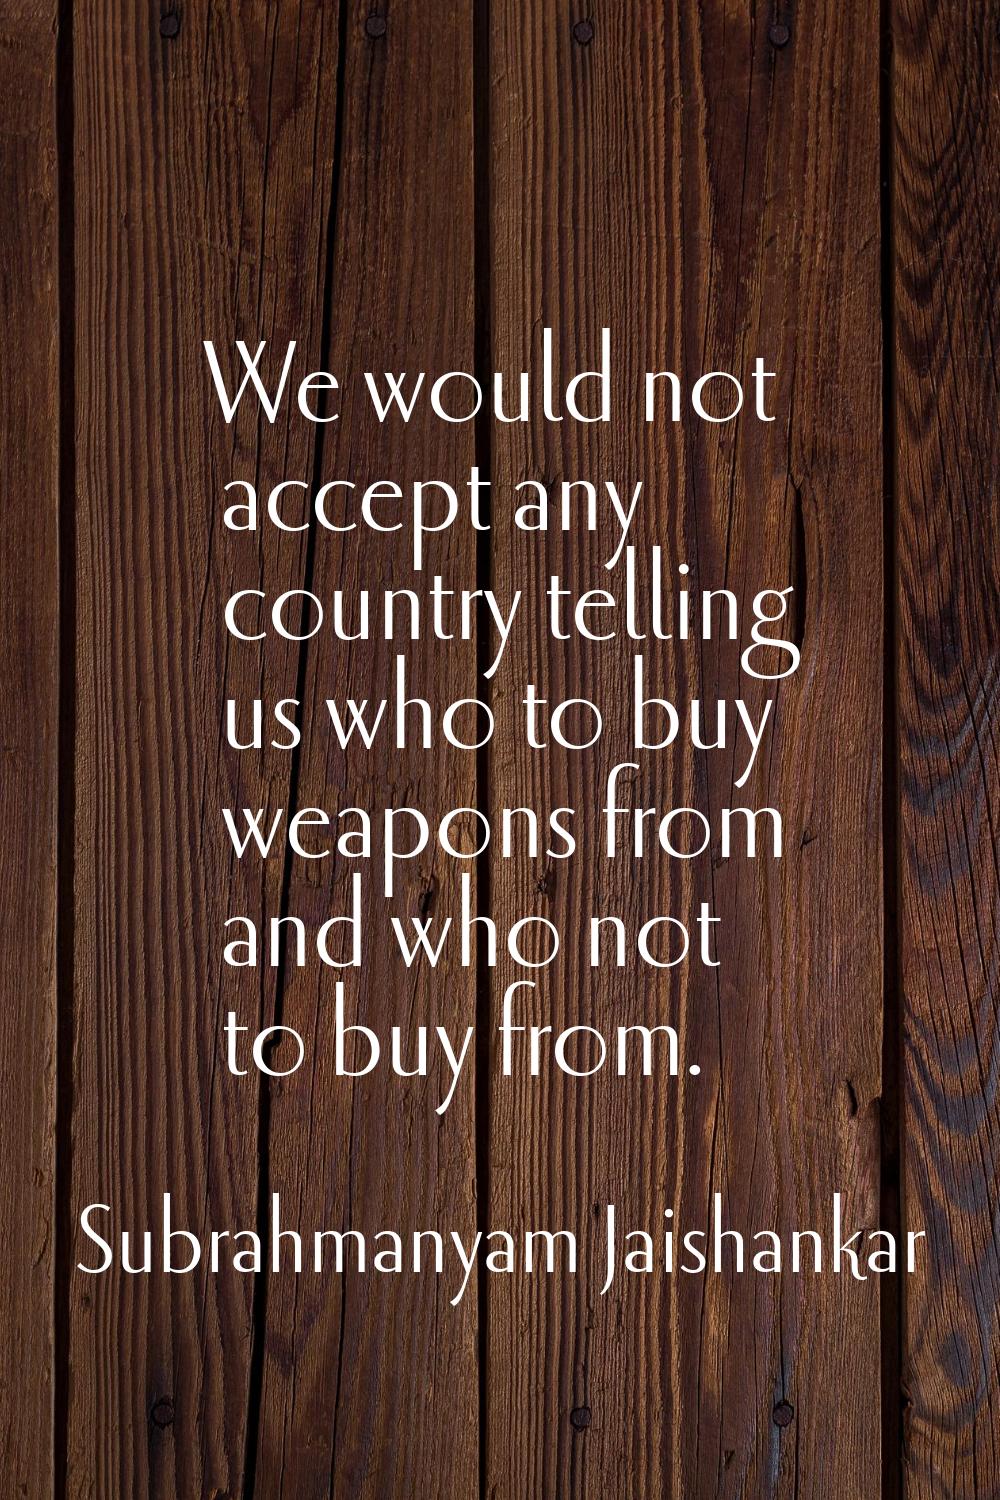 We would not accept any country telling us who to buy weapons from and who not to buy from.